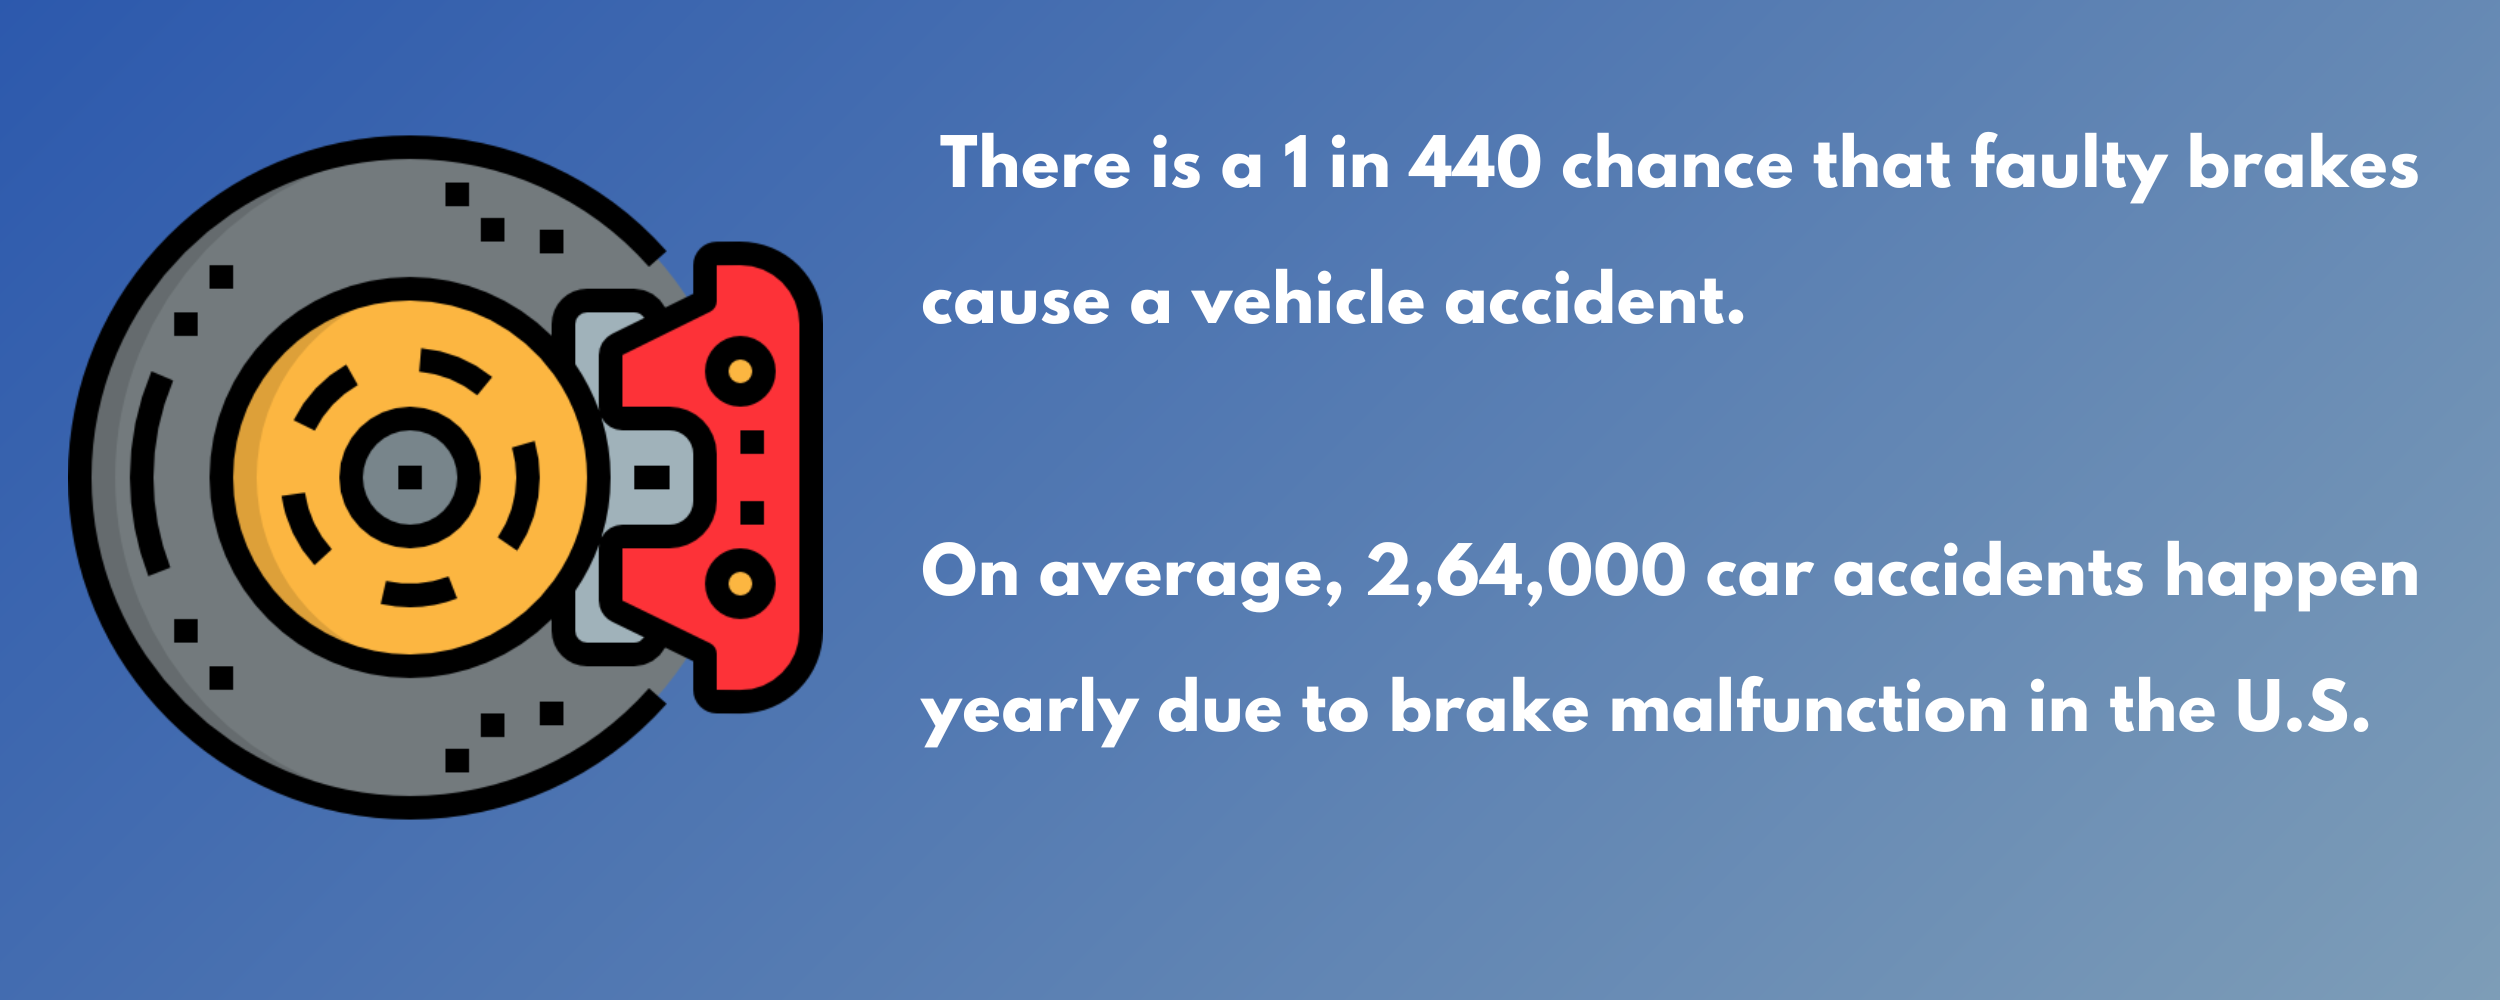 chance of accident due to brake failure and number of accidents due to brake failure